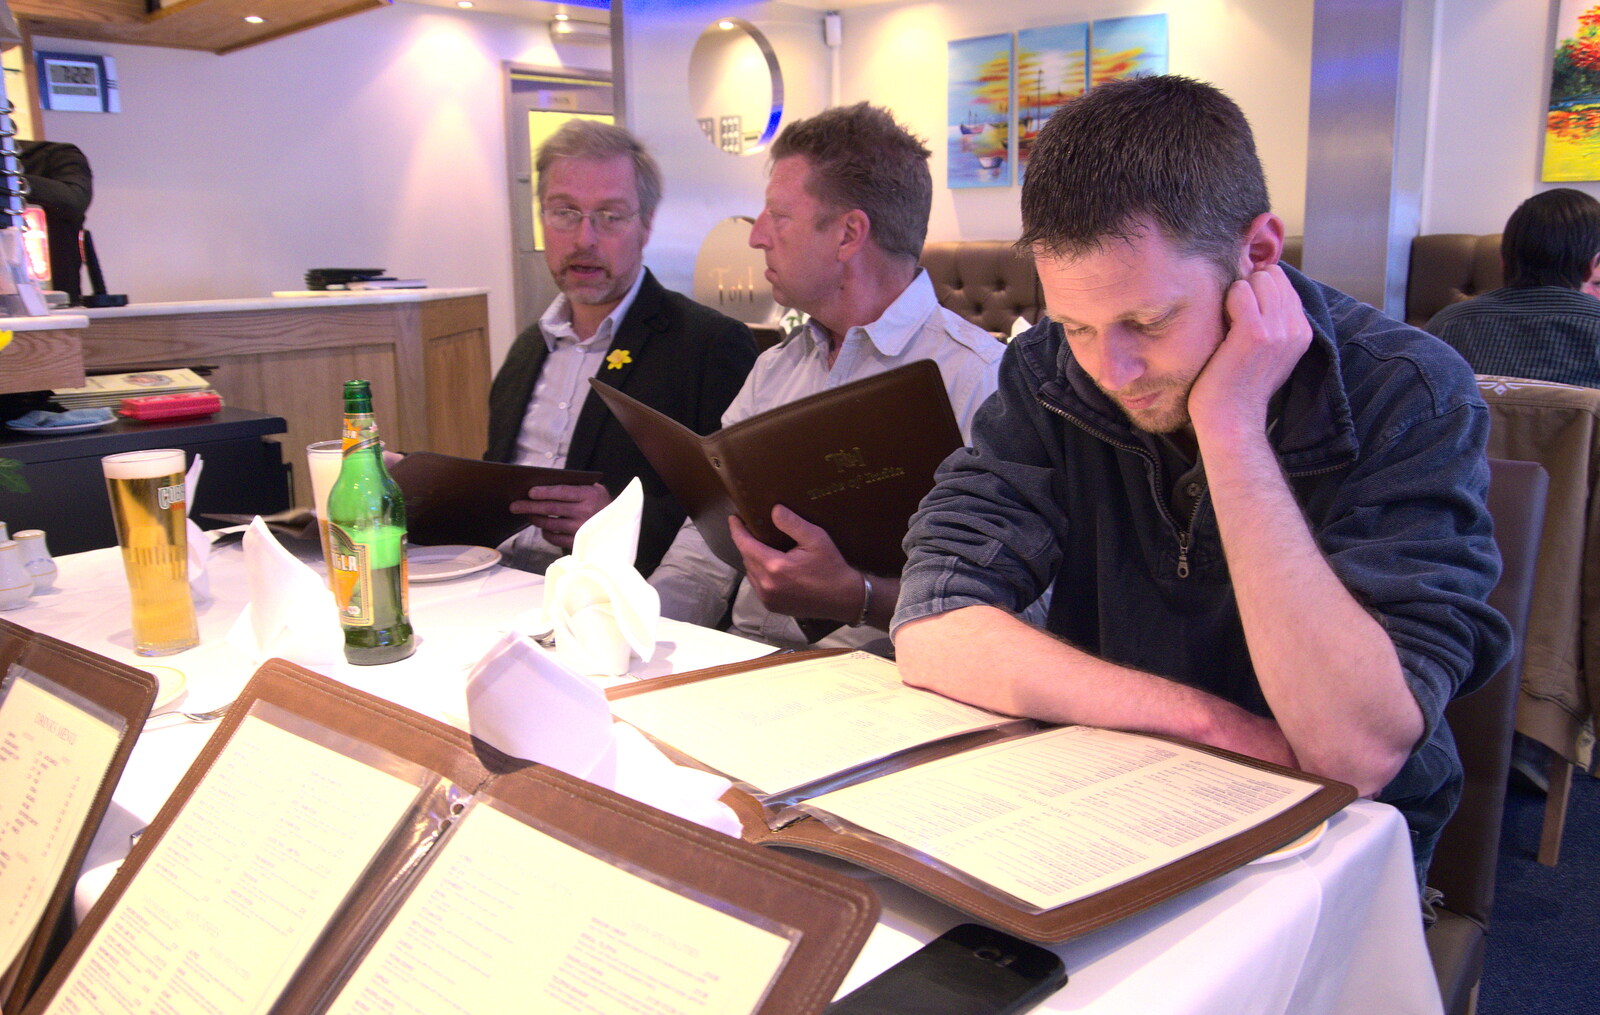 The Boy Phil scopes the menu out from The BSCC Weekend Away, Holt, Norfolk - 12th May 2018